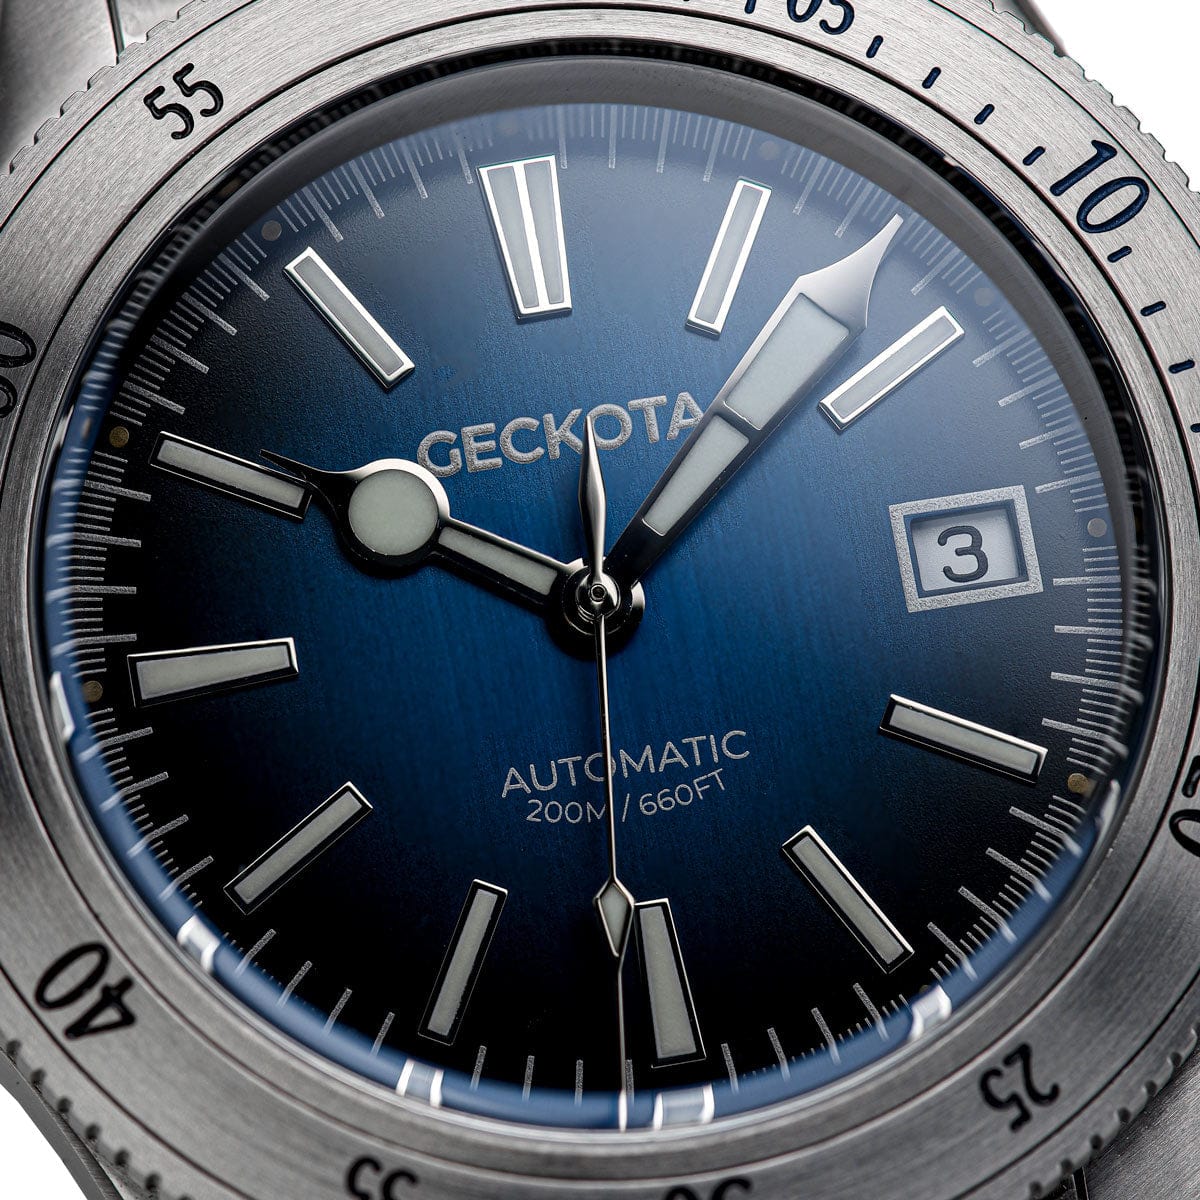 Geckota Sea Hunter Automatic Diver's Watch Steel Edition - Blue Dial